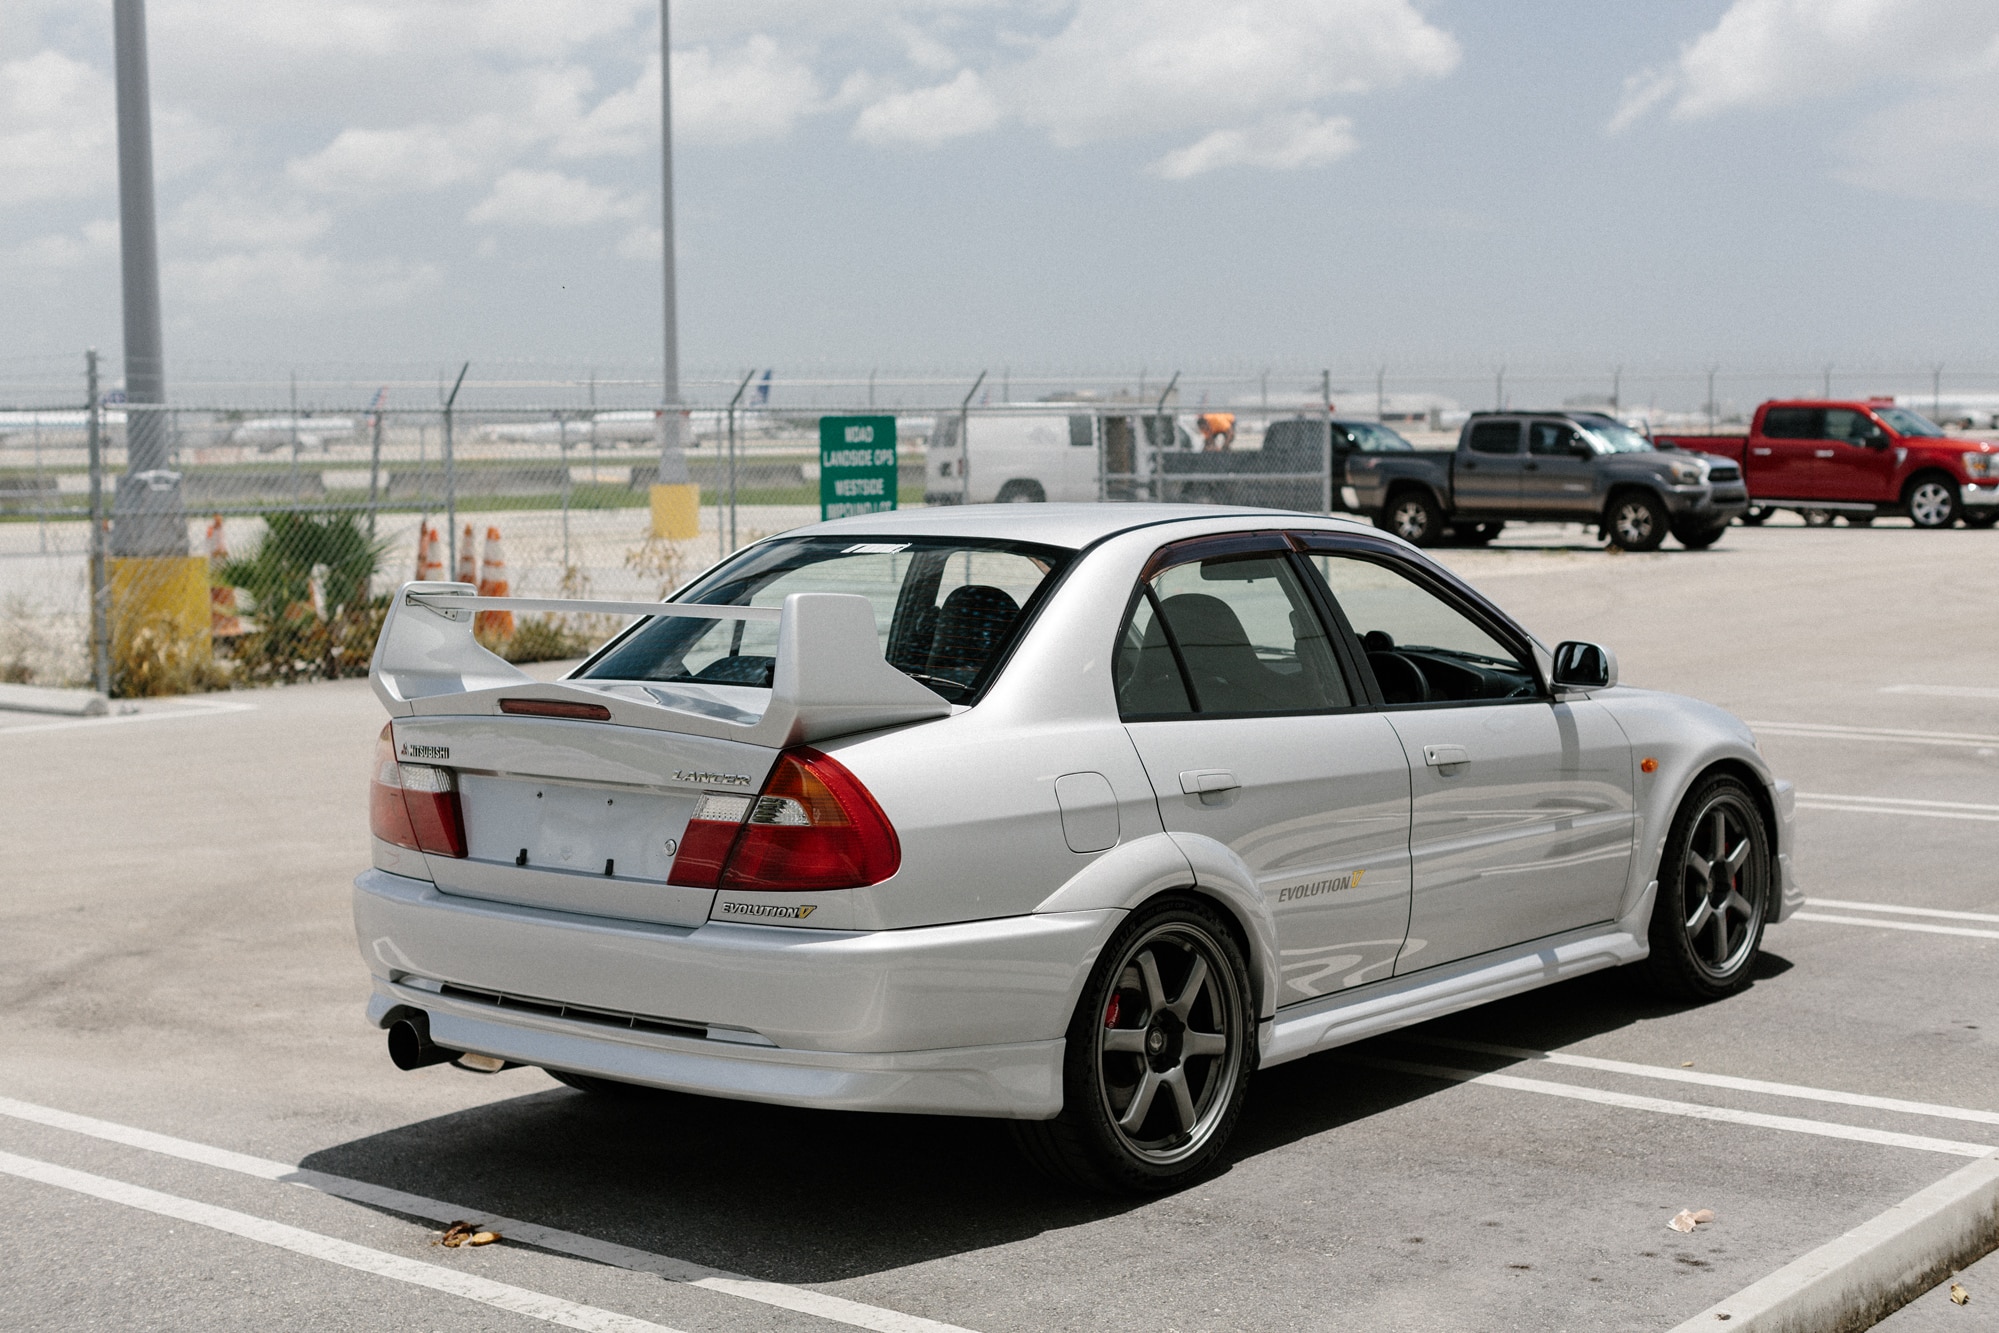 1998 Mitsubishi Lancer Evolution V GSR (CP9A)| 1 of 1,903 | ORIGINAL PAINT! | Mint Condition | Extremely Dialed-in Suspension Setup | Blitz ZZR Coilovers | Cusco Bits | Michelin Sport Cup 2 | Boost Up | Ralliart Exhaust | Gruppe M Intake | OEM++